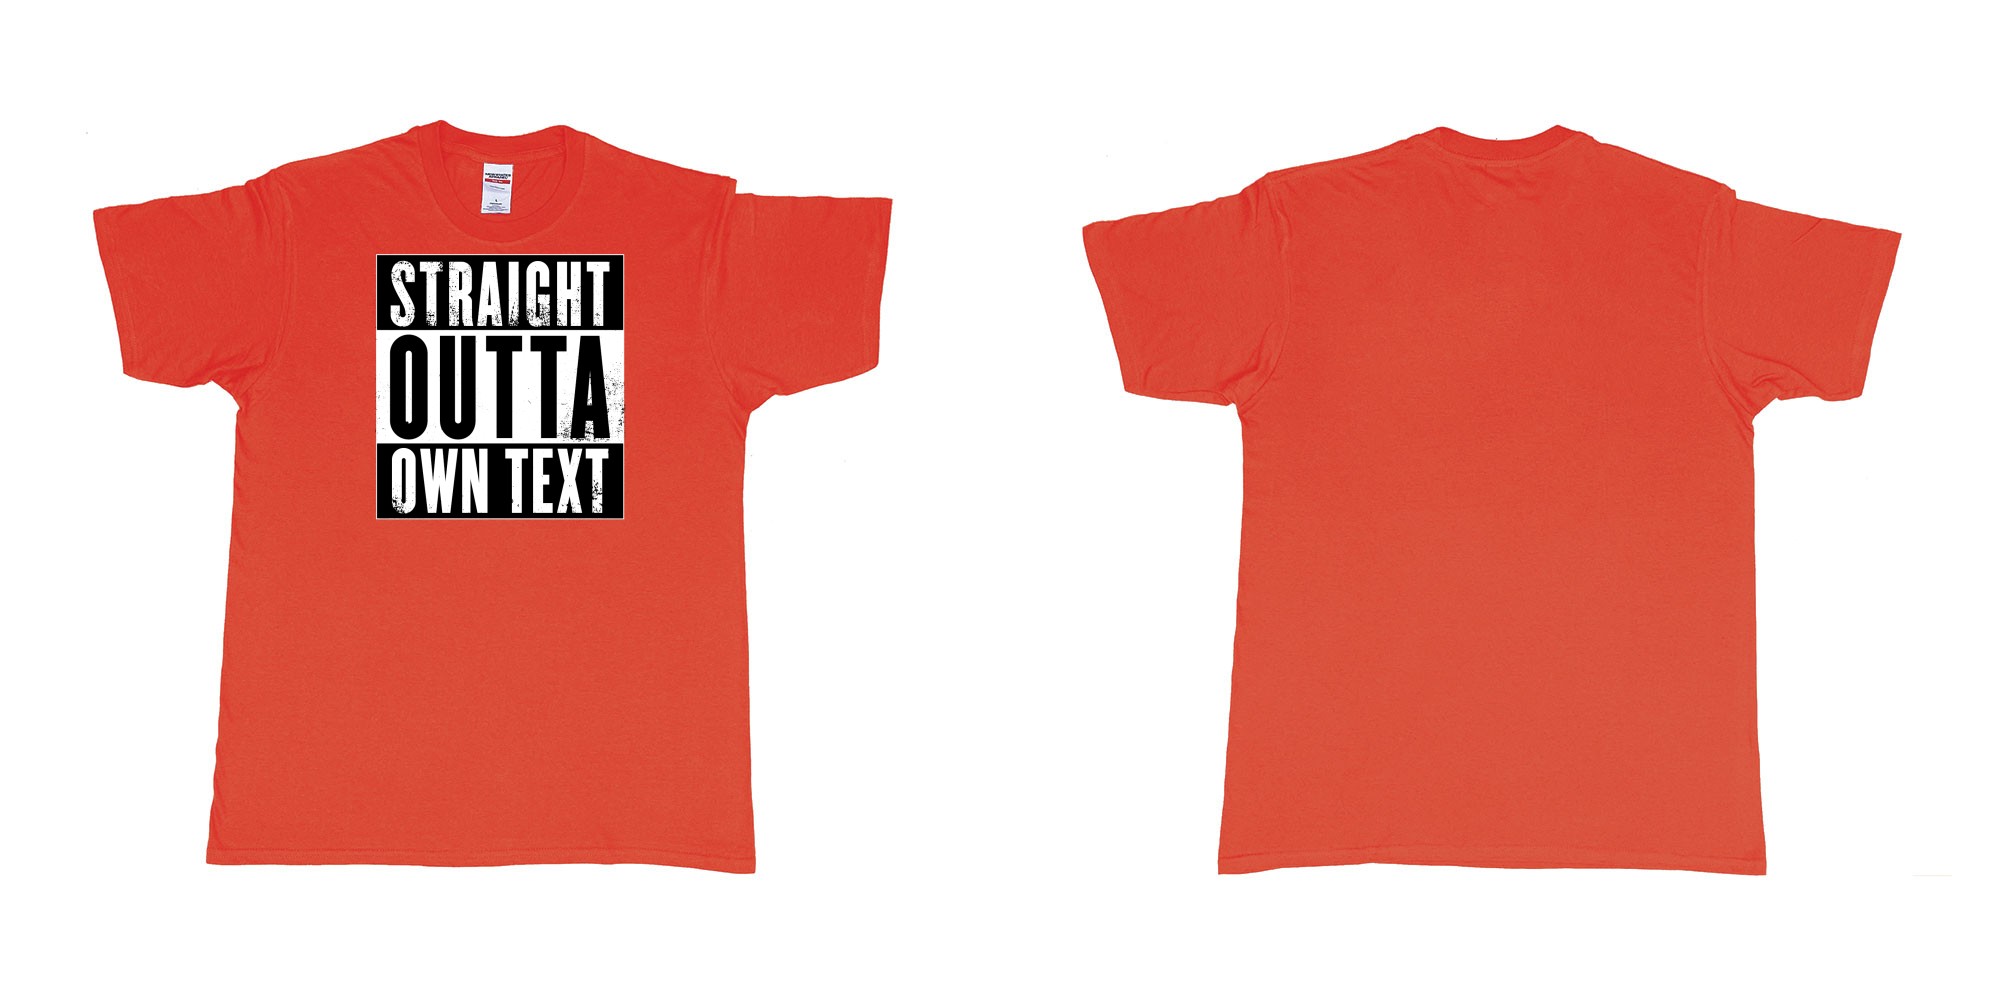 Custom tshirt design Straight Outta Compton in fabric color red choice your own text made in Bali by The Pirate Way